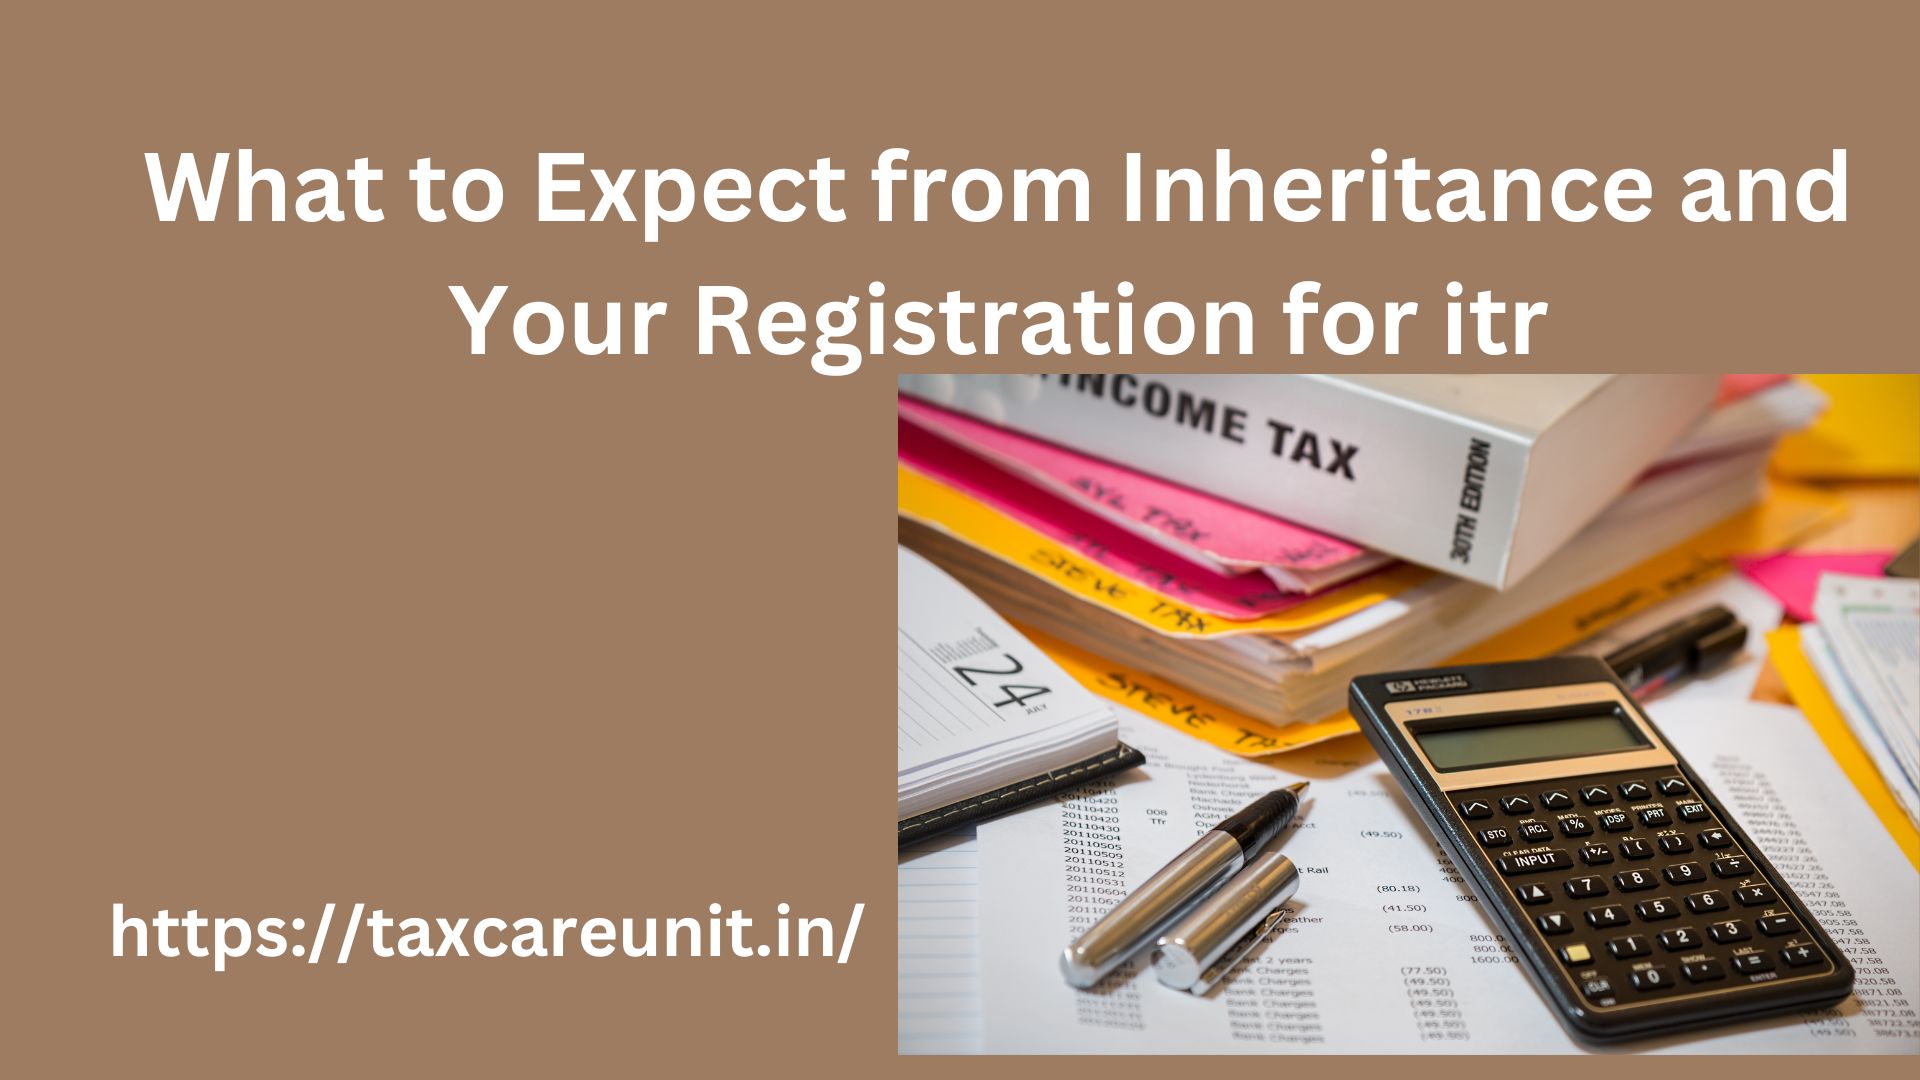 What to Expect from Inheritance and Your Registration for itr